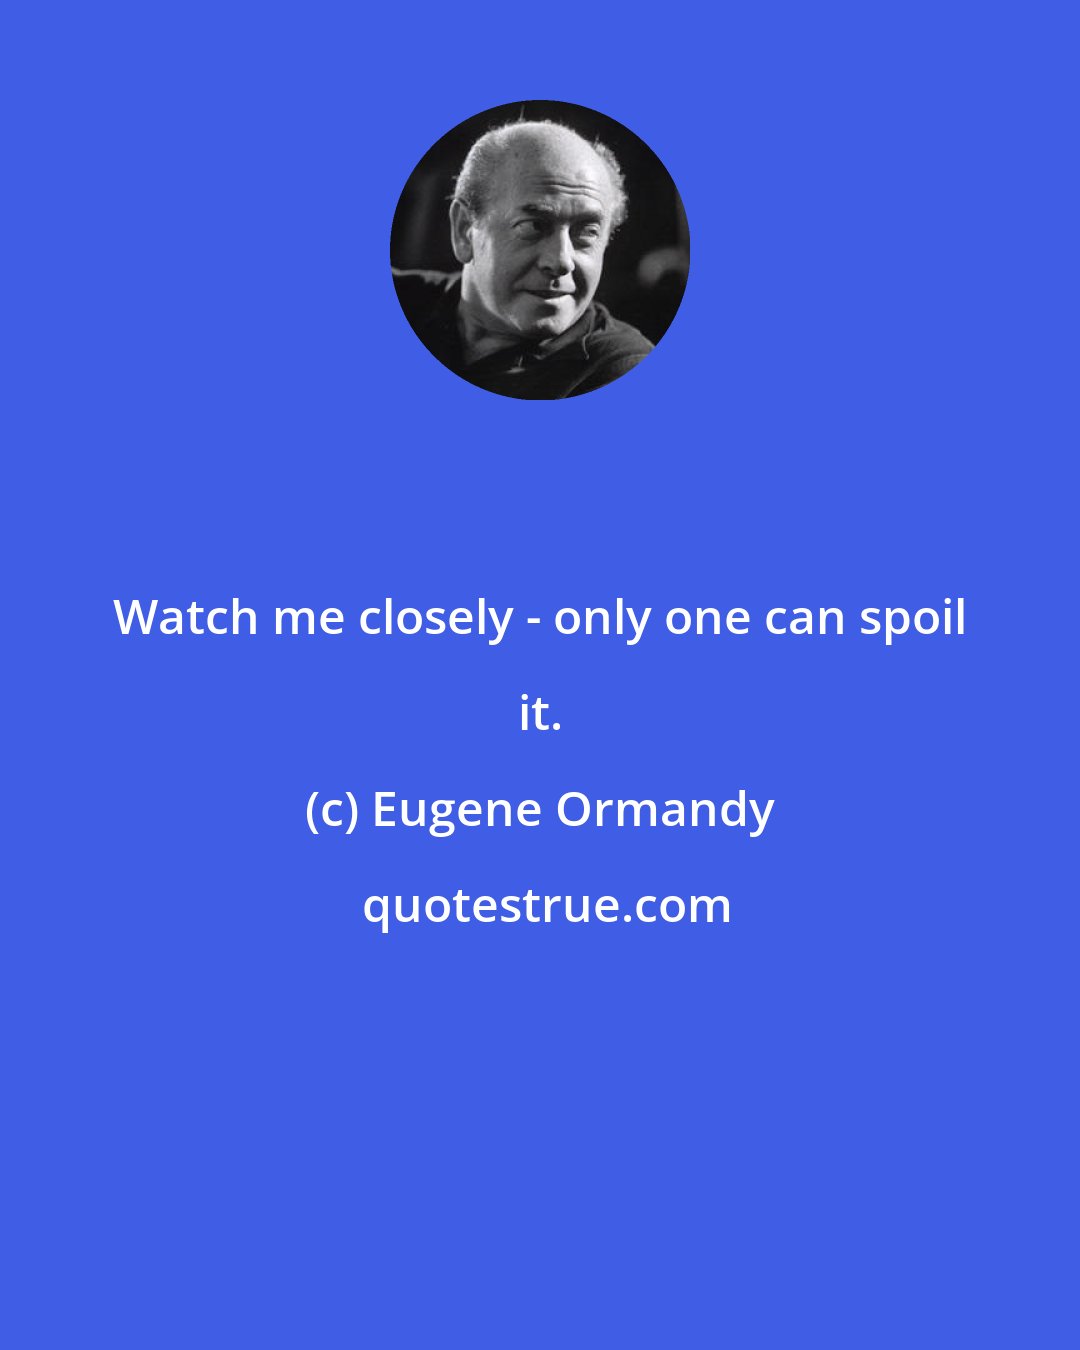 Eugene Ormandy: Watch me closely - only one can spoil it.